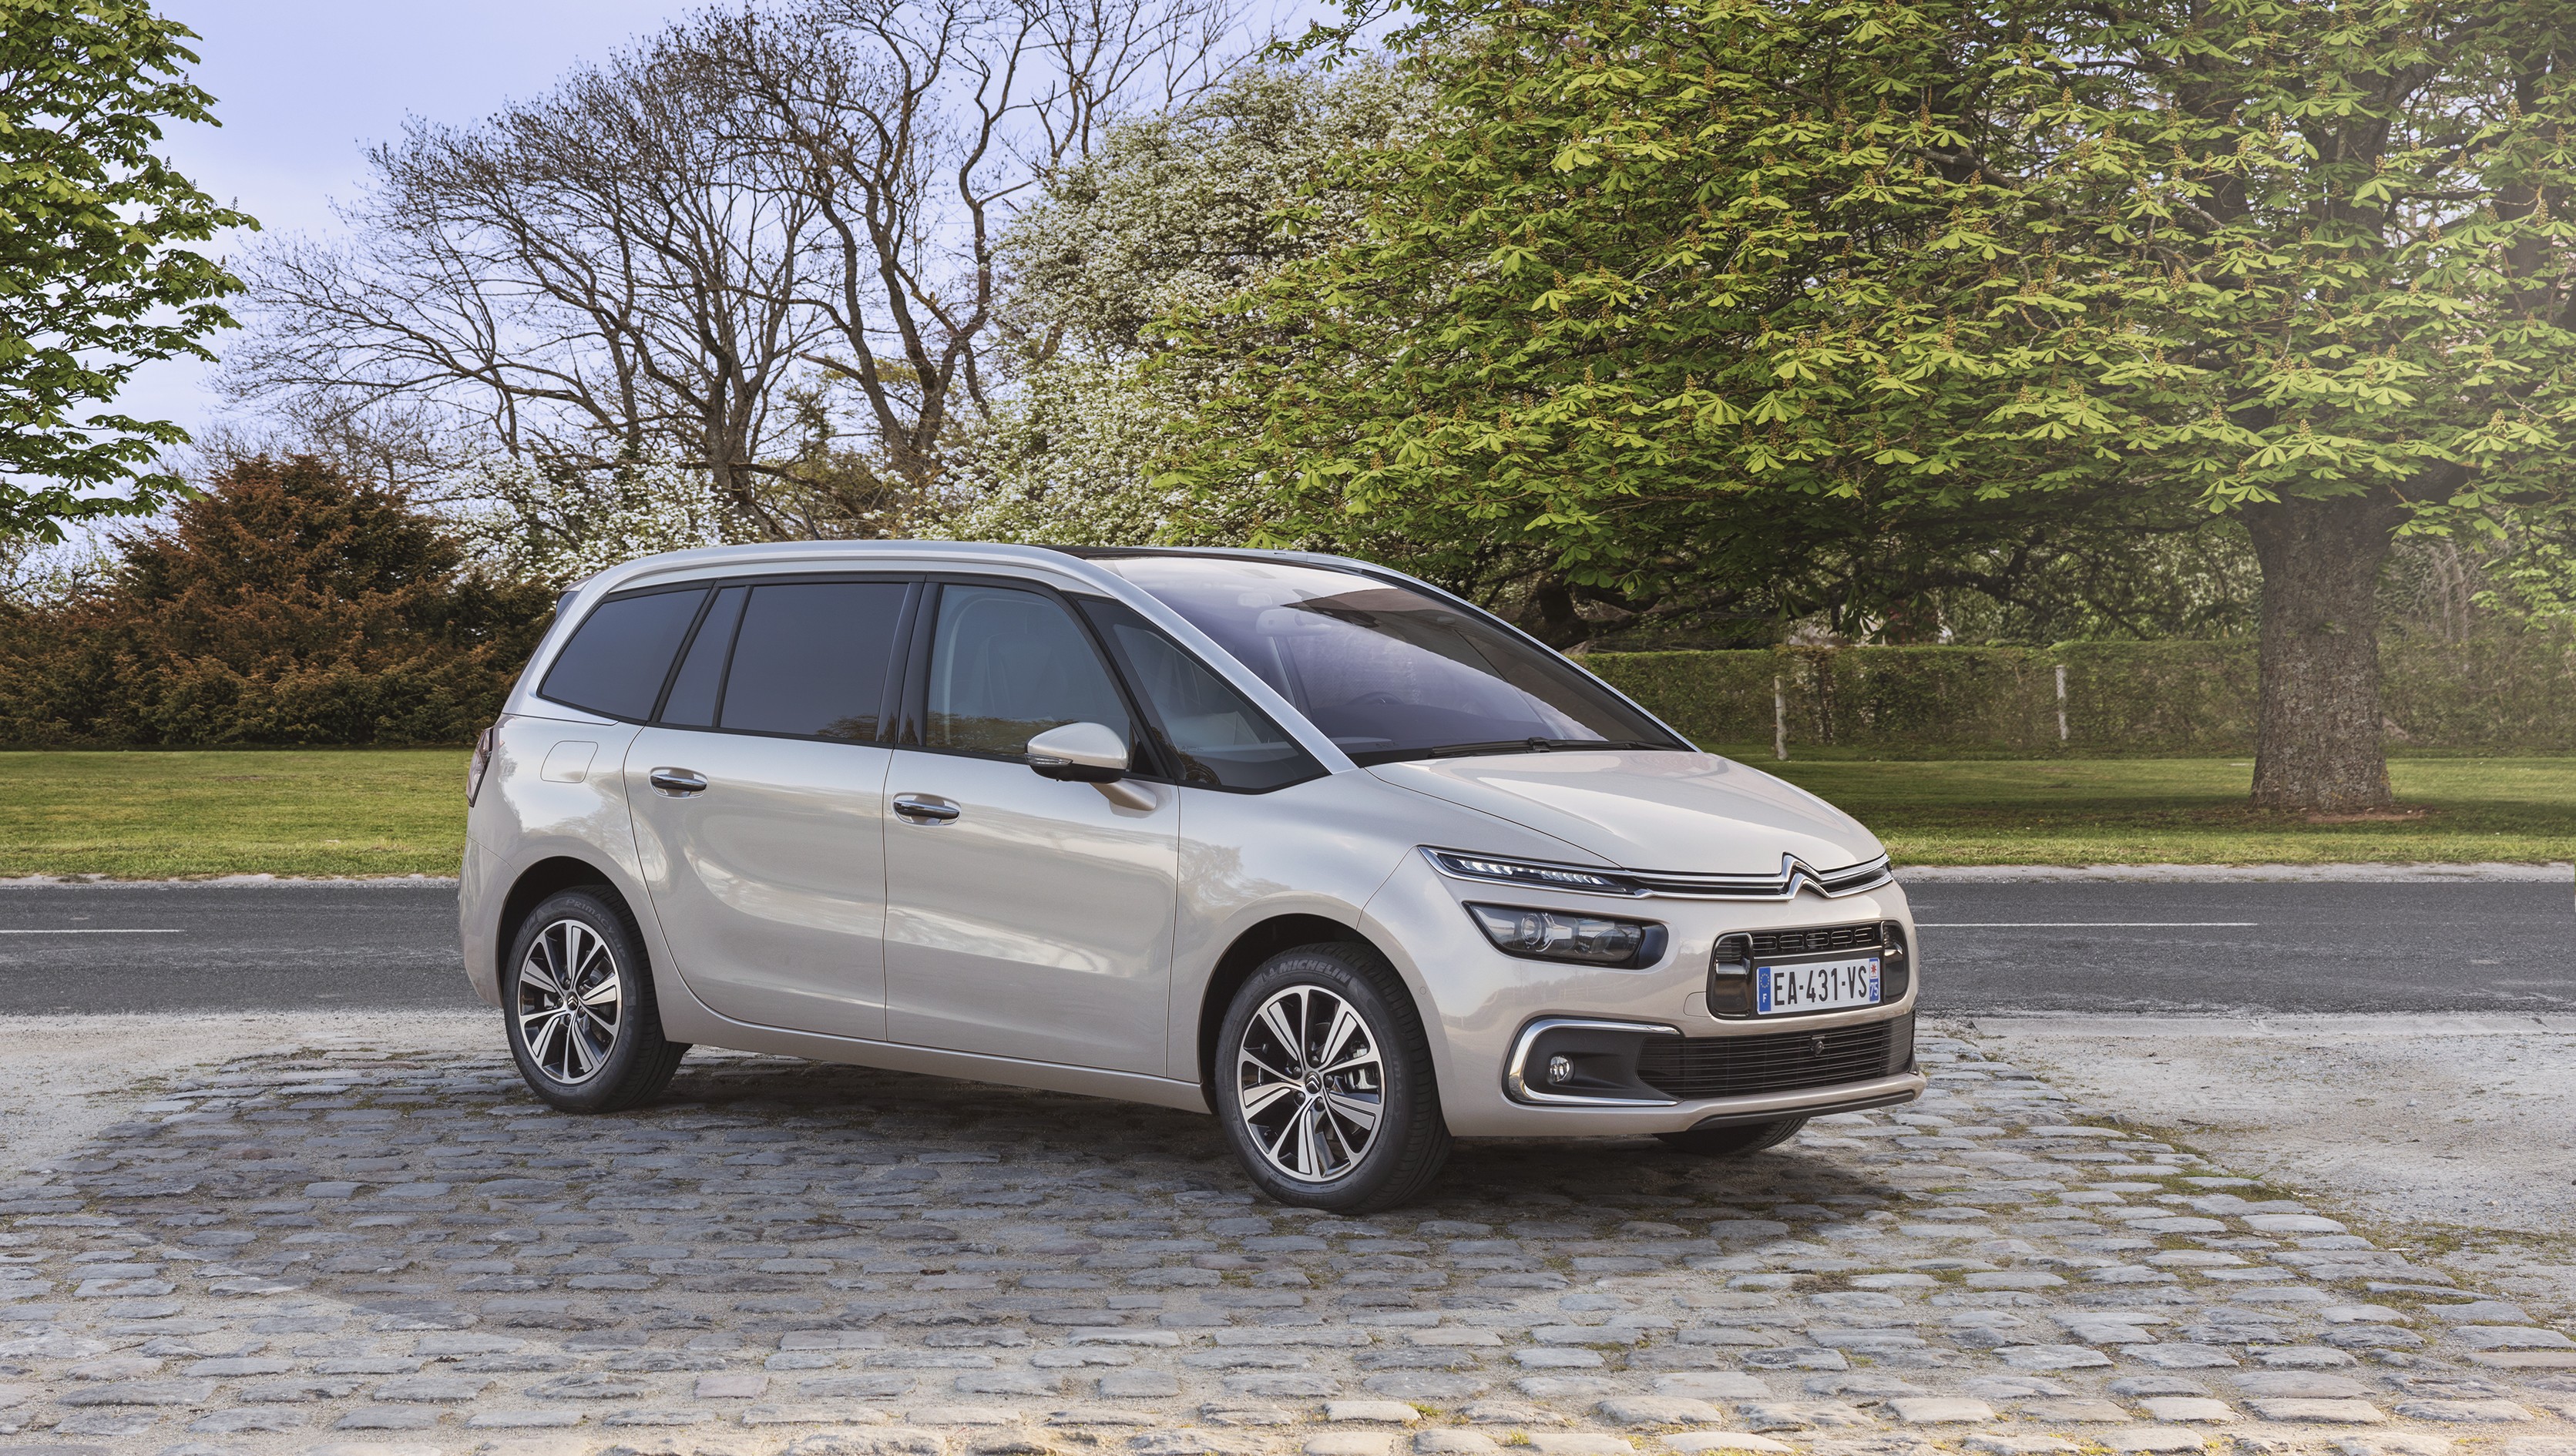 Citroen set to end production of the Grand C4 SpaceTourer in July